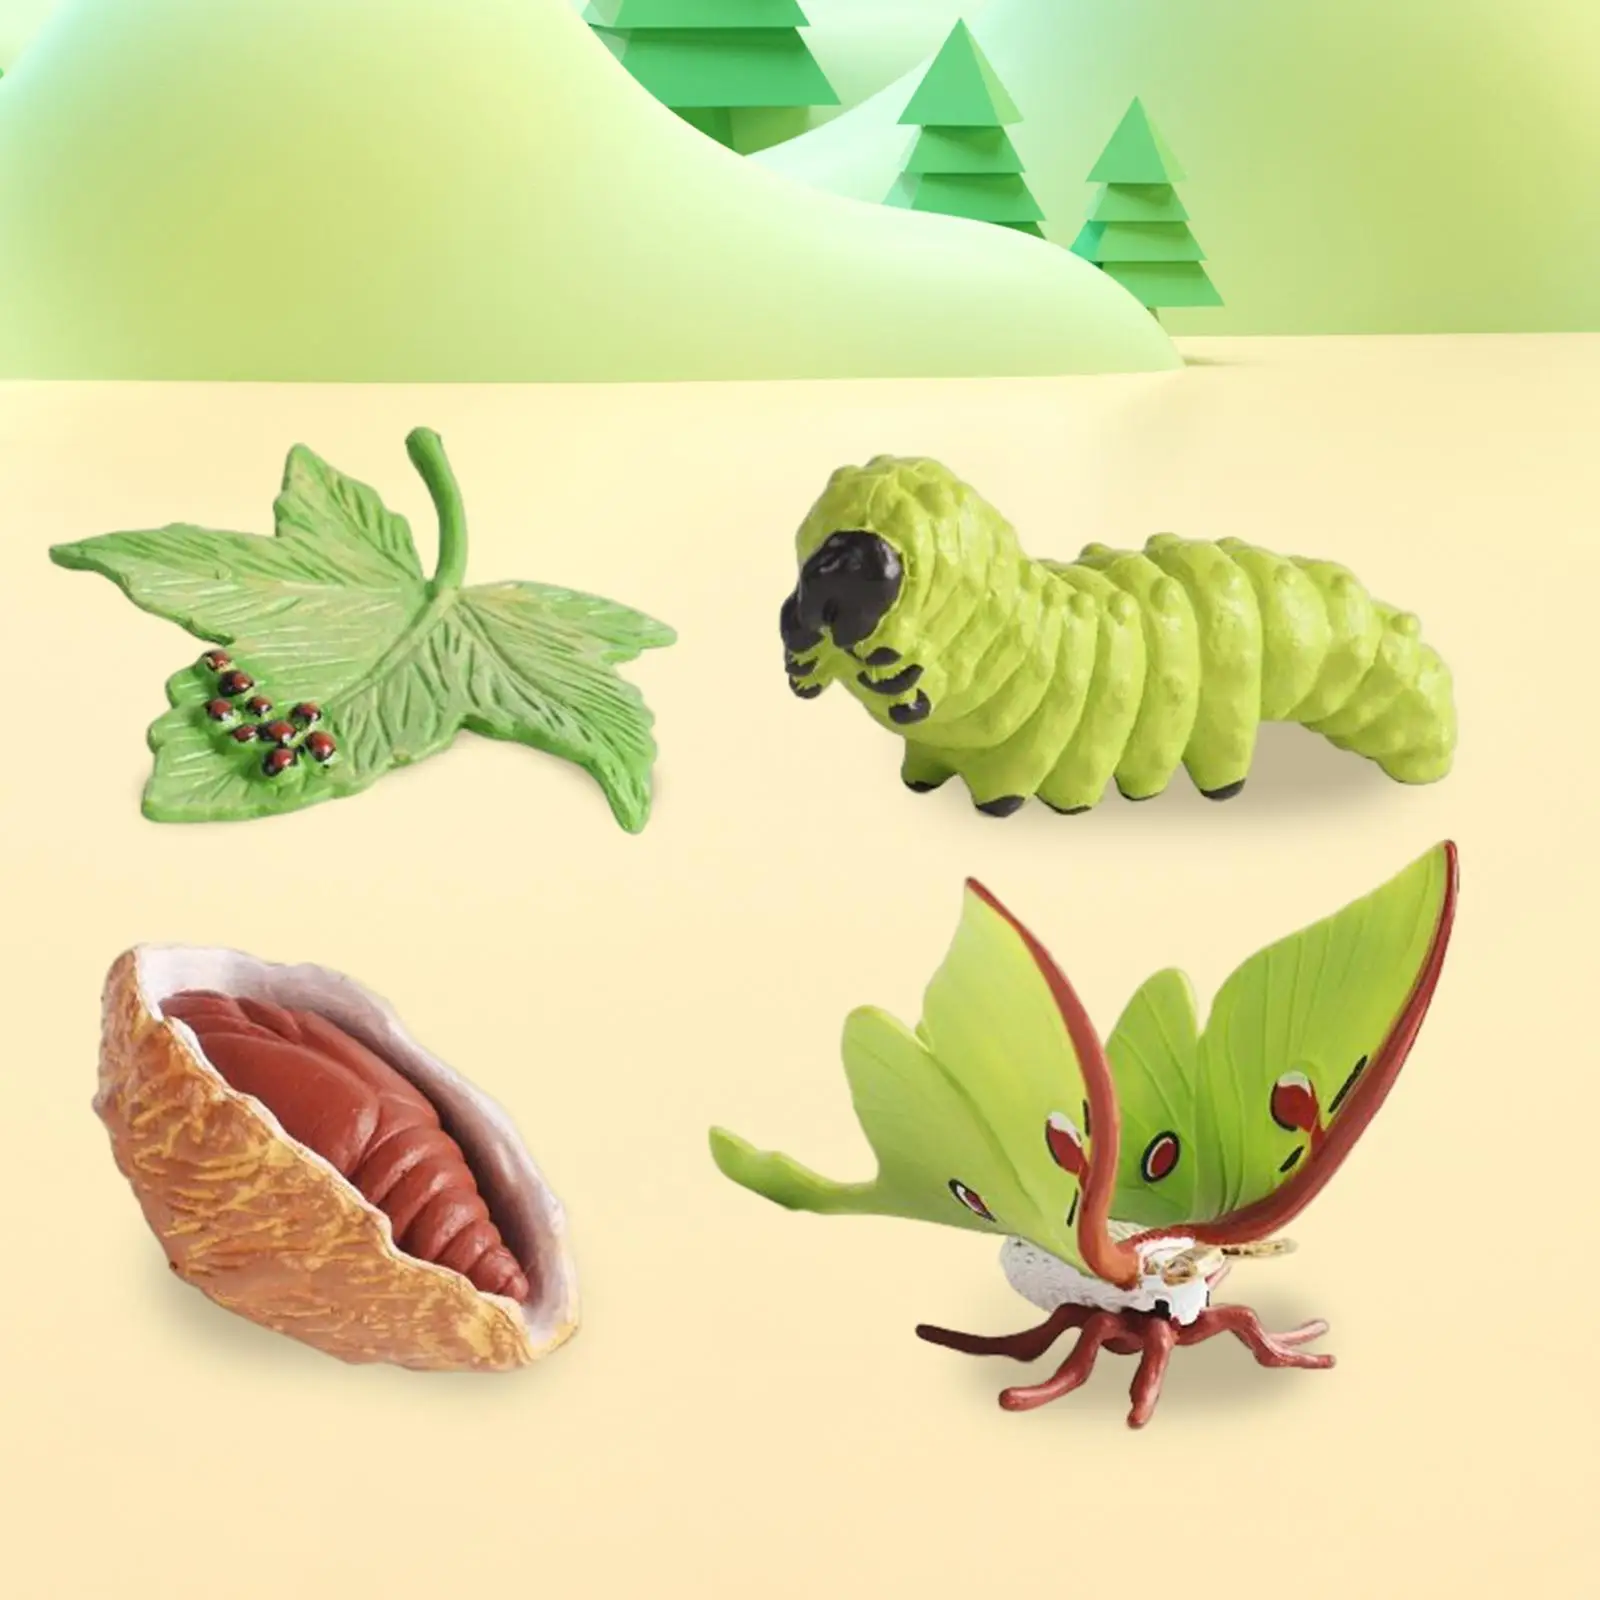 Life Cycle Figurines Animal Cognitive Science Toy for Girls Preschool Kids